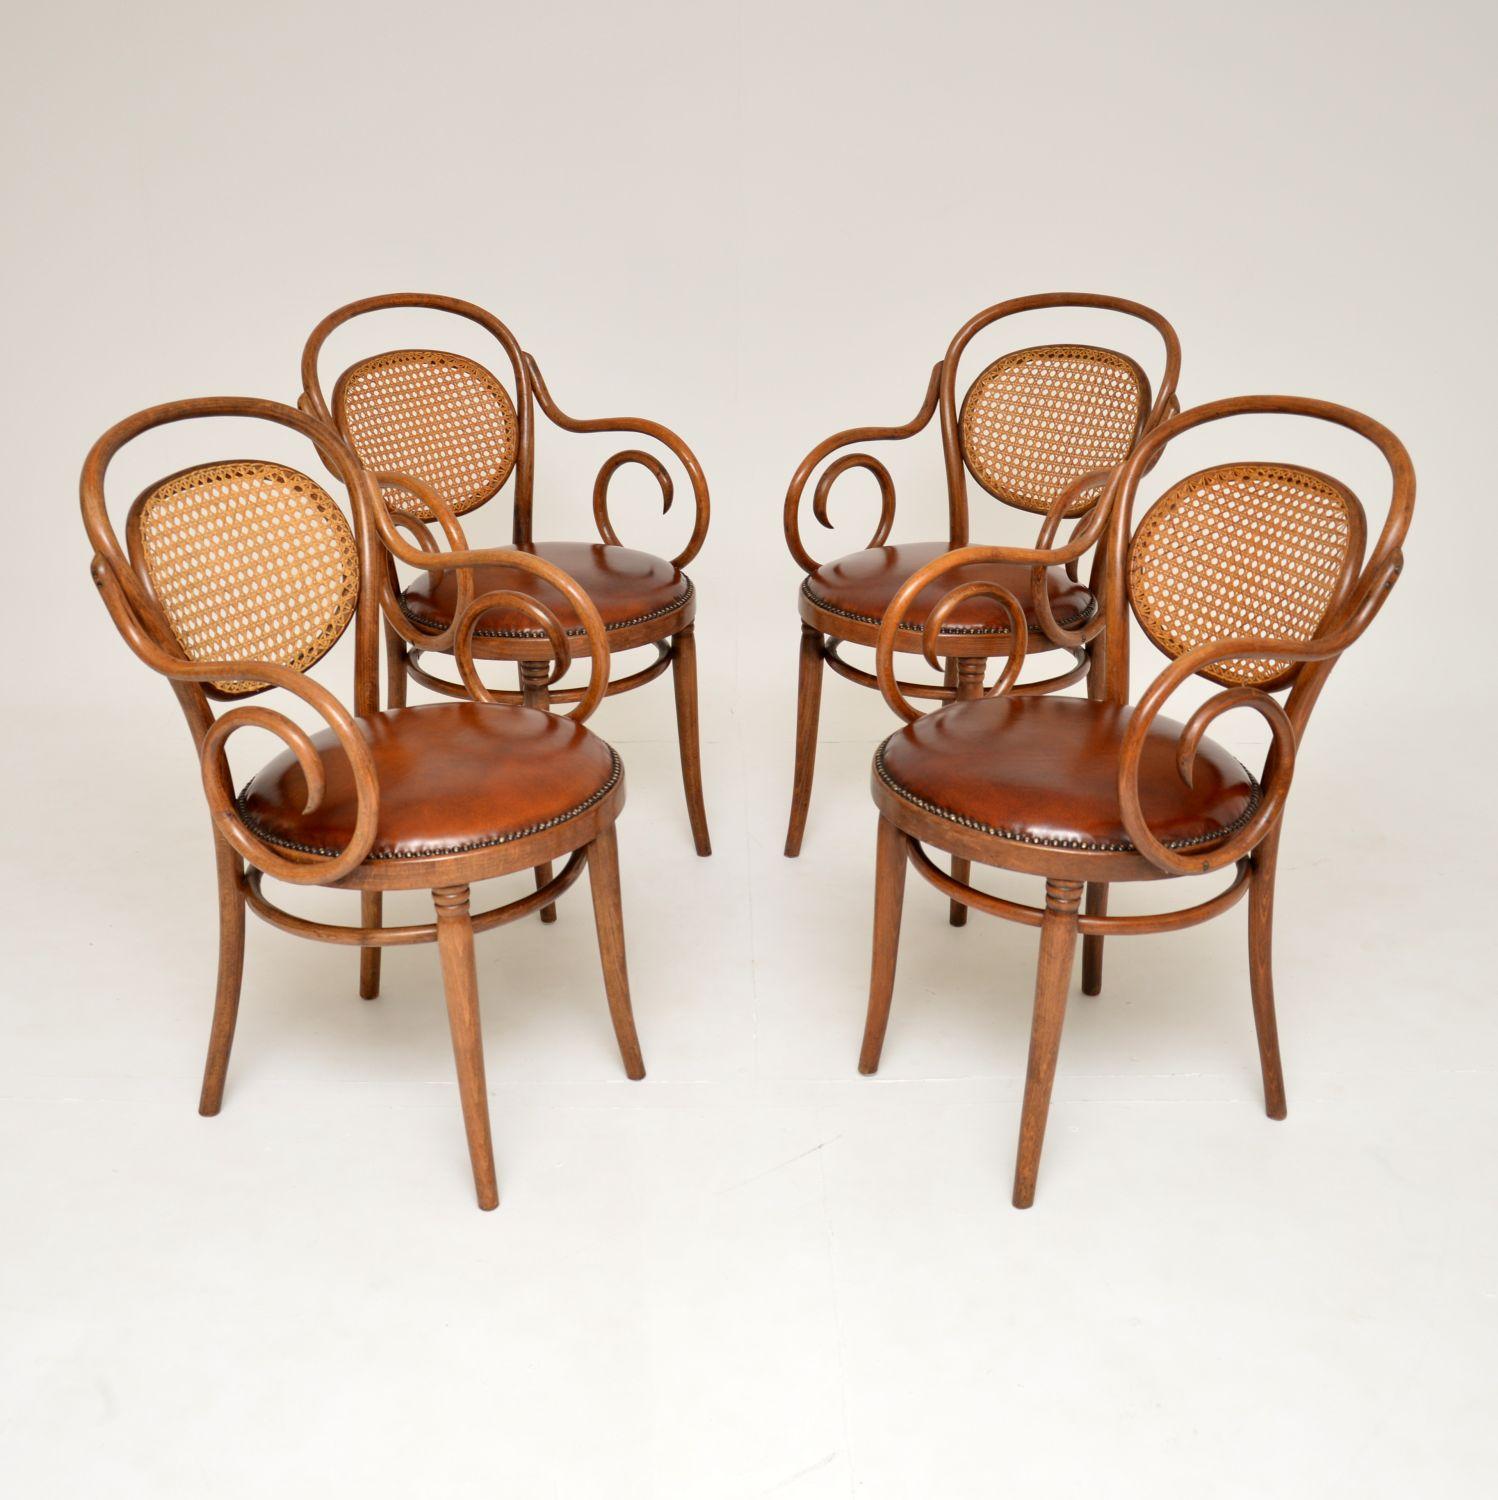 Polish Set of 4 Antique Thonet Bentwood & Leather Dining Chairs